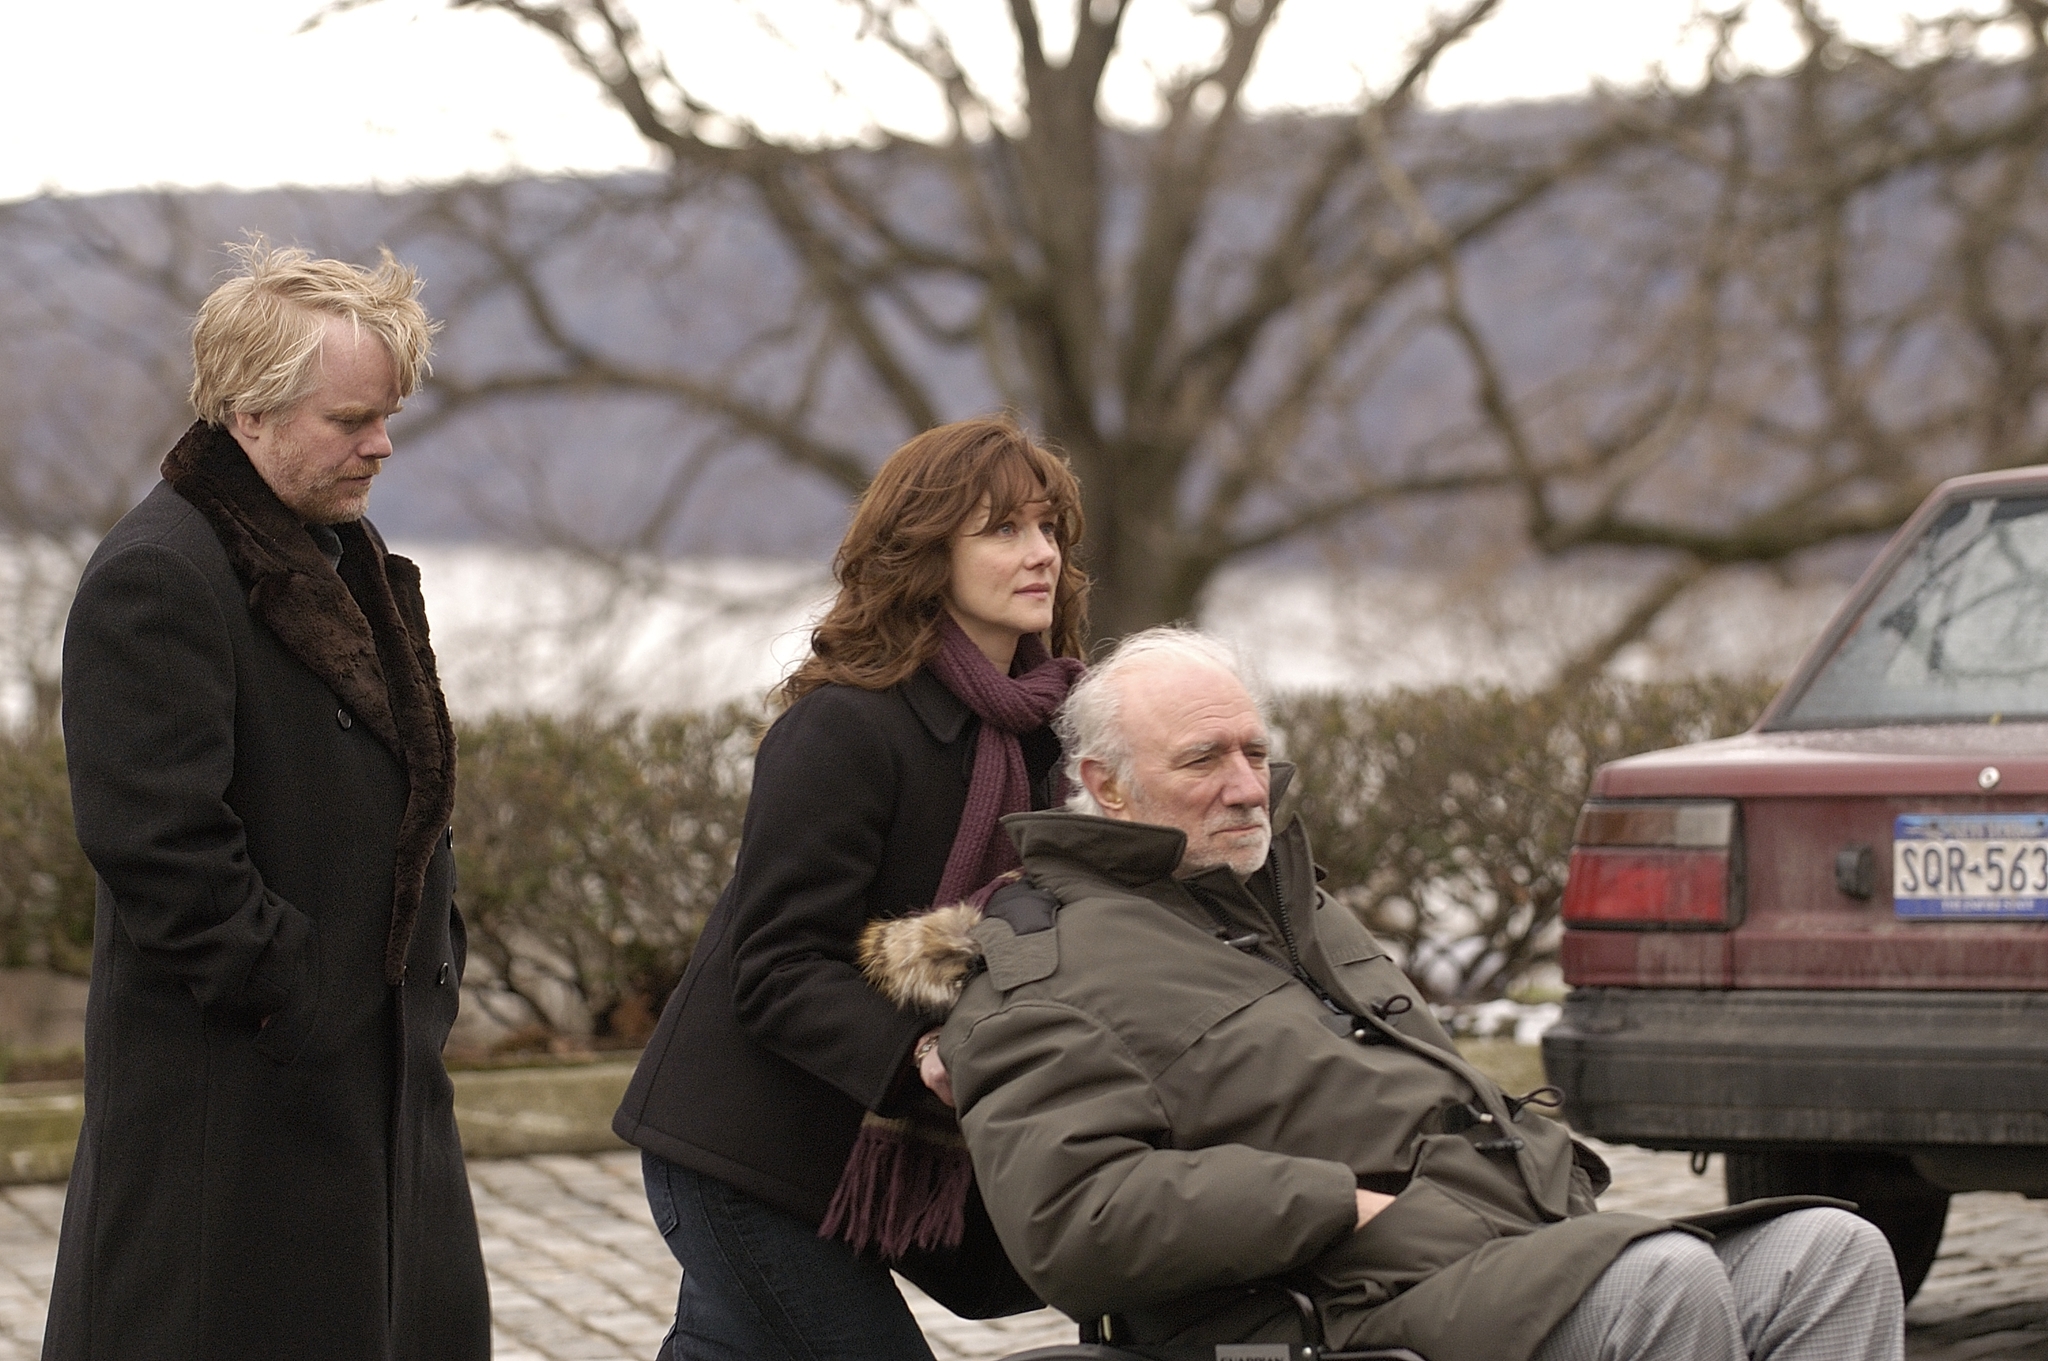 Still of Philip Seymour Hoffman, Laura Linney and Philip Bosco in The Savages (2007)